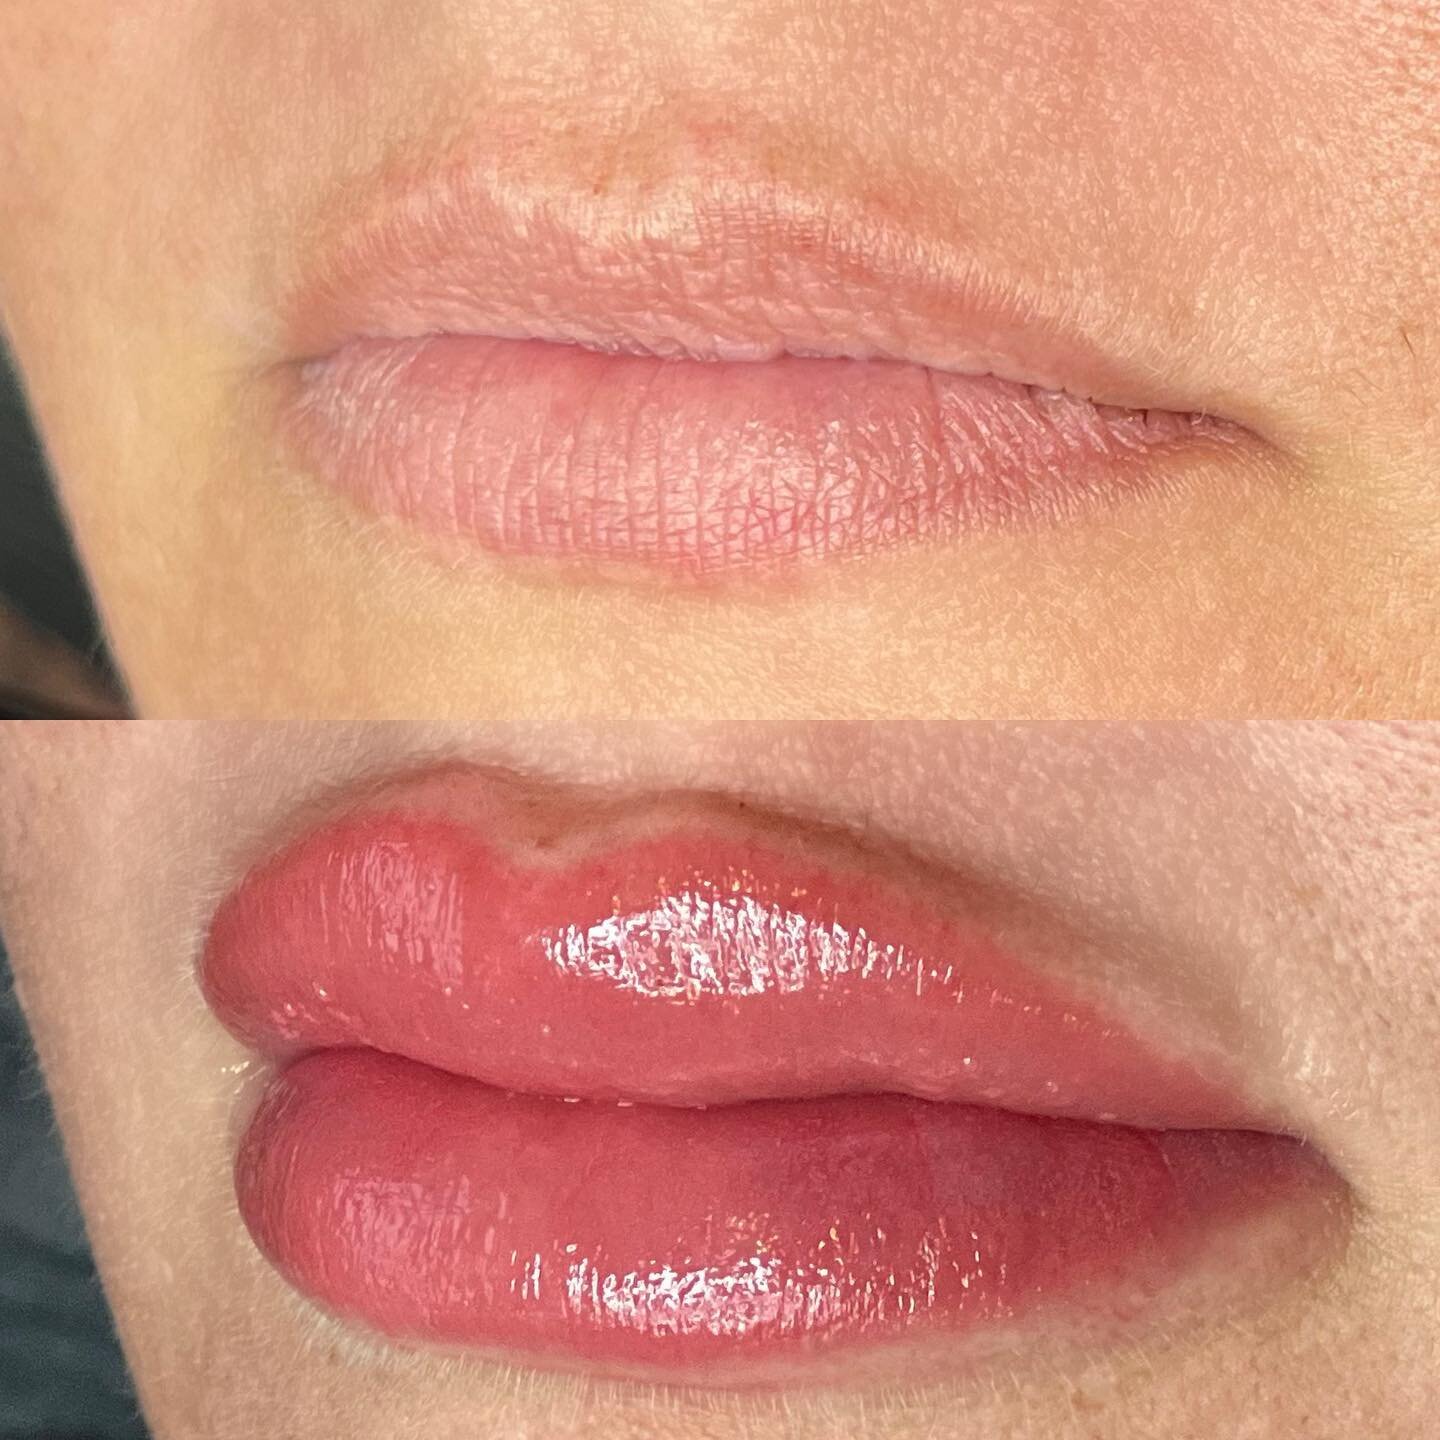 Fresh Lip Blush 👄 
.
Color will lighten about 40% as it heals and swelling goes down in a few hours.
.
#johnsoncitylipfiller #johnsoncitylipblush #knoxvillelipfiller #knoxvillelipblushing #ashevillelipfiller #ashevillelipblush #knoxvilletattoo #ashe